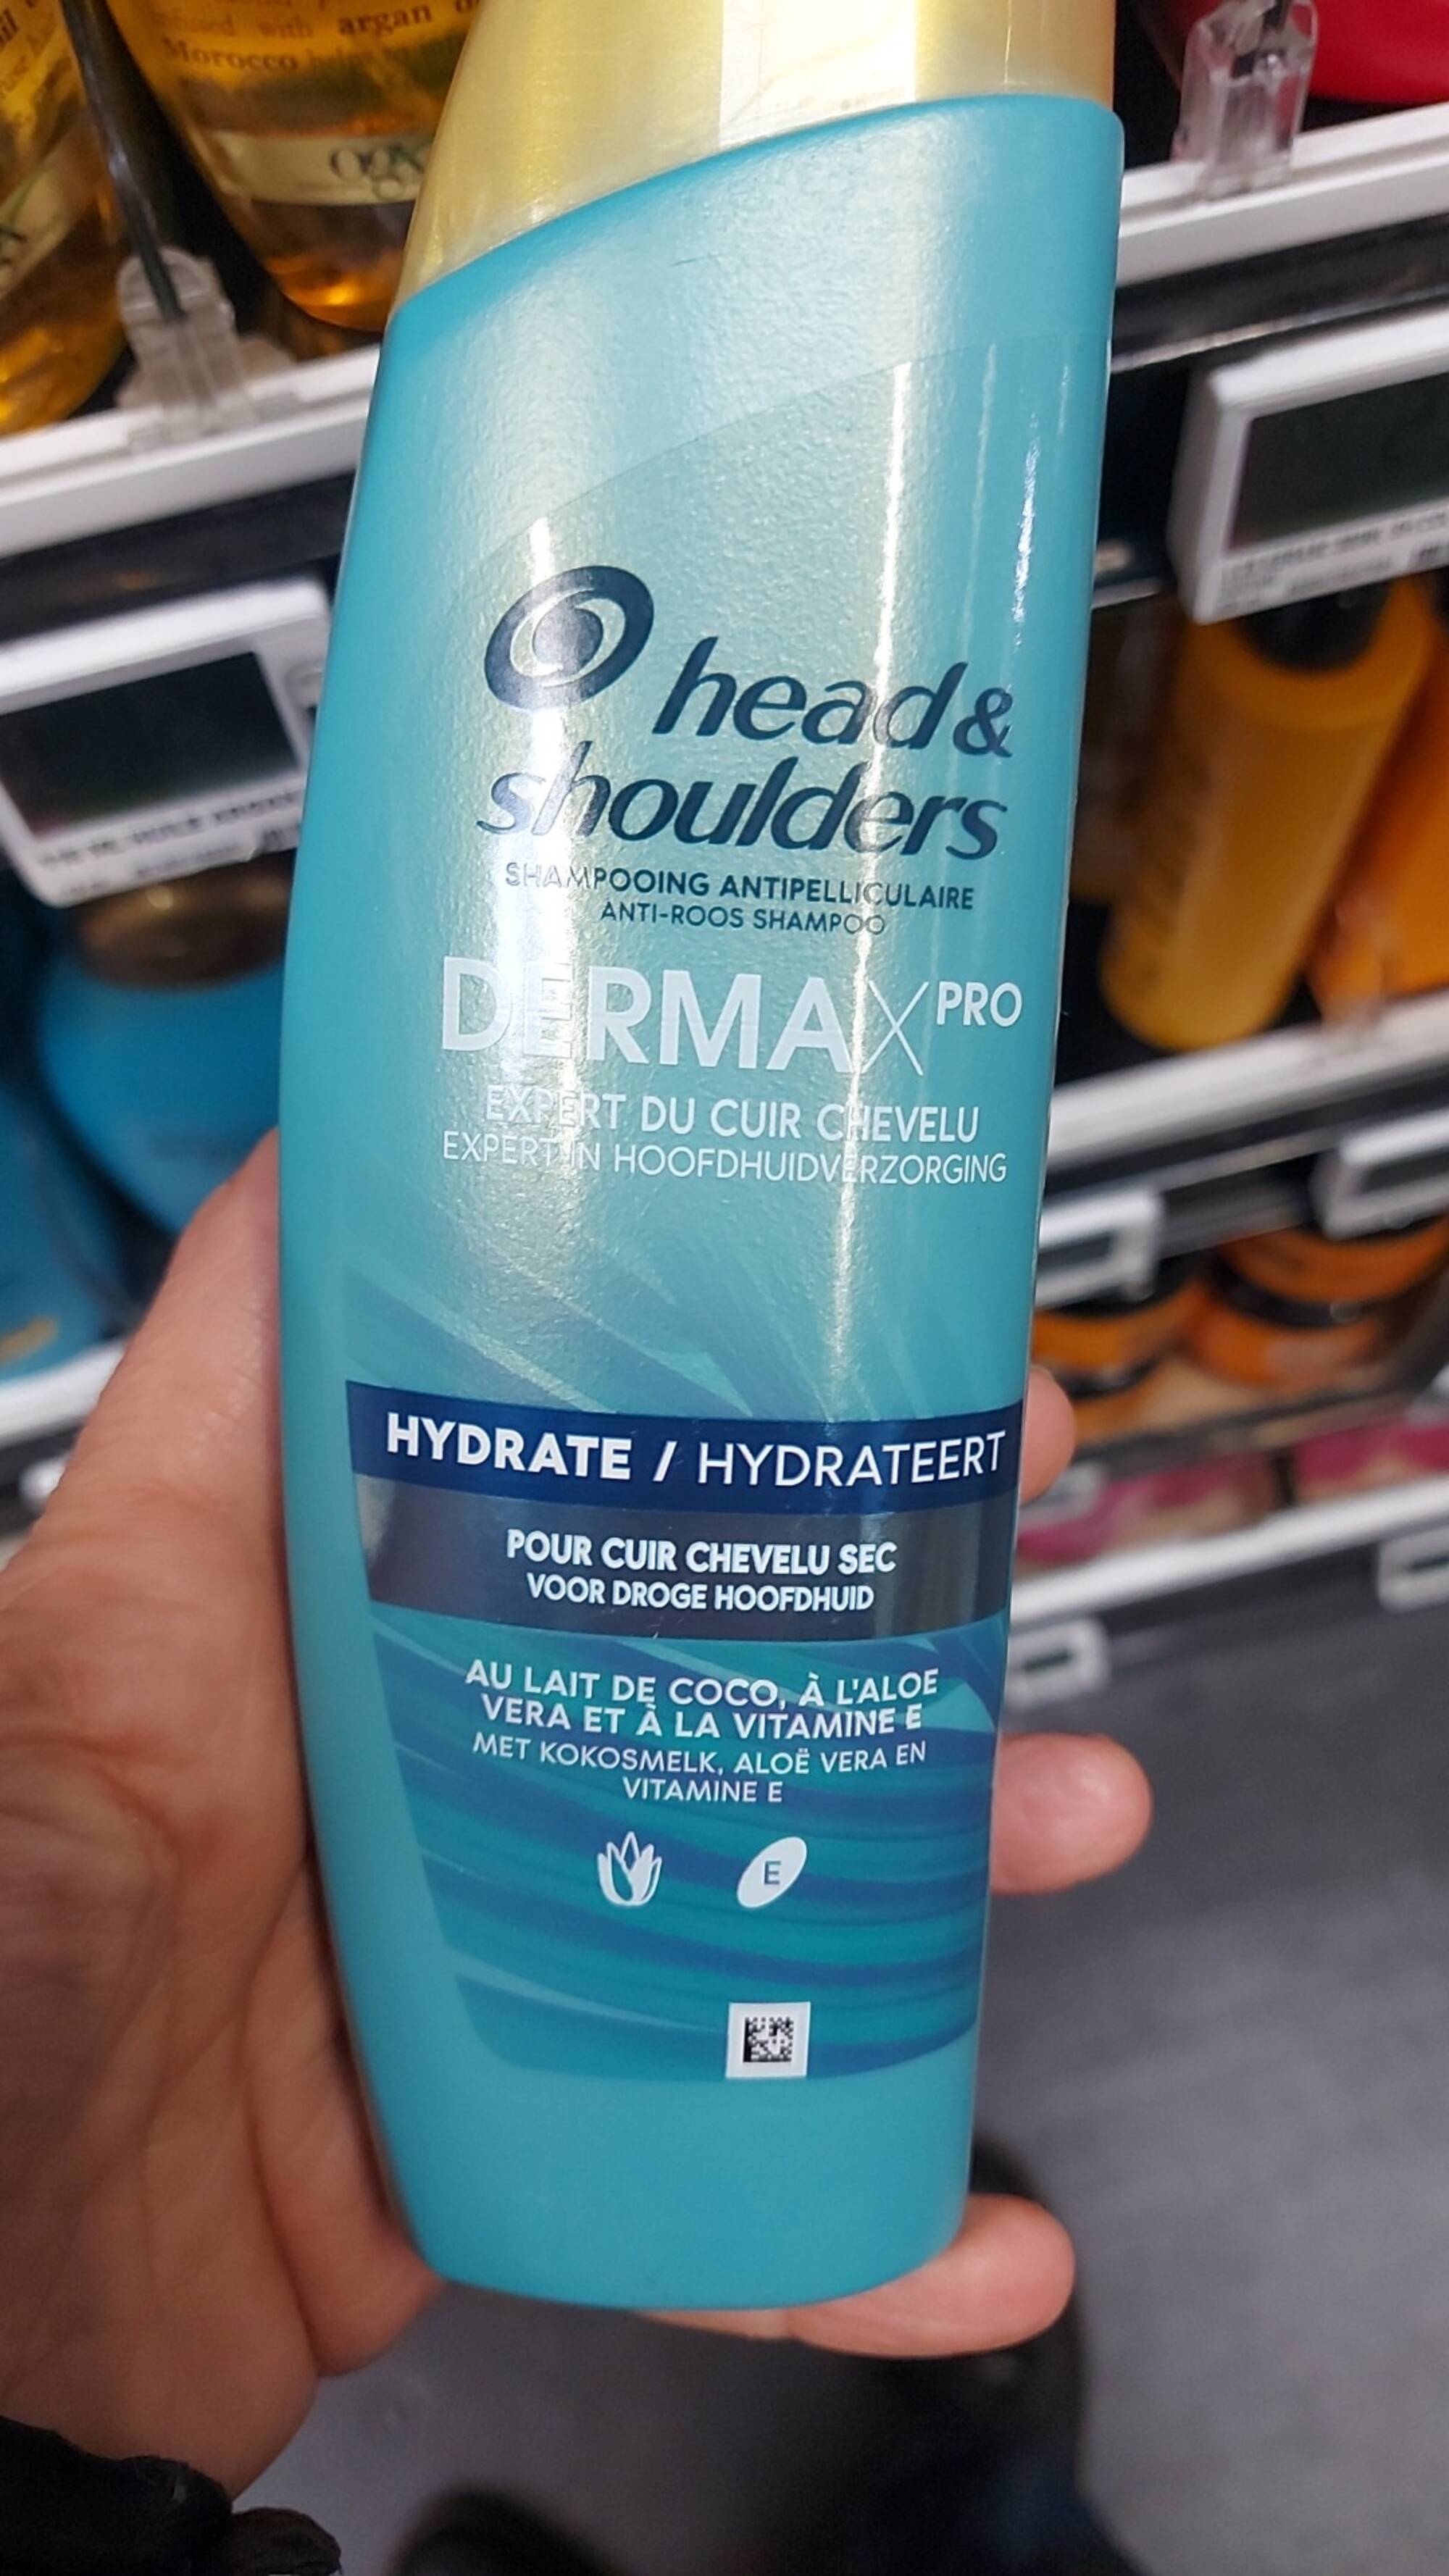 HEAD & SHOULDERS - Dermax pro hydrate - Shampooing antipelliculaire